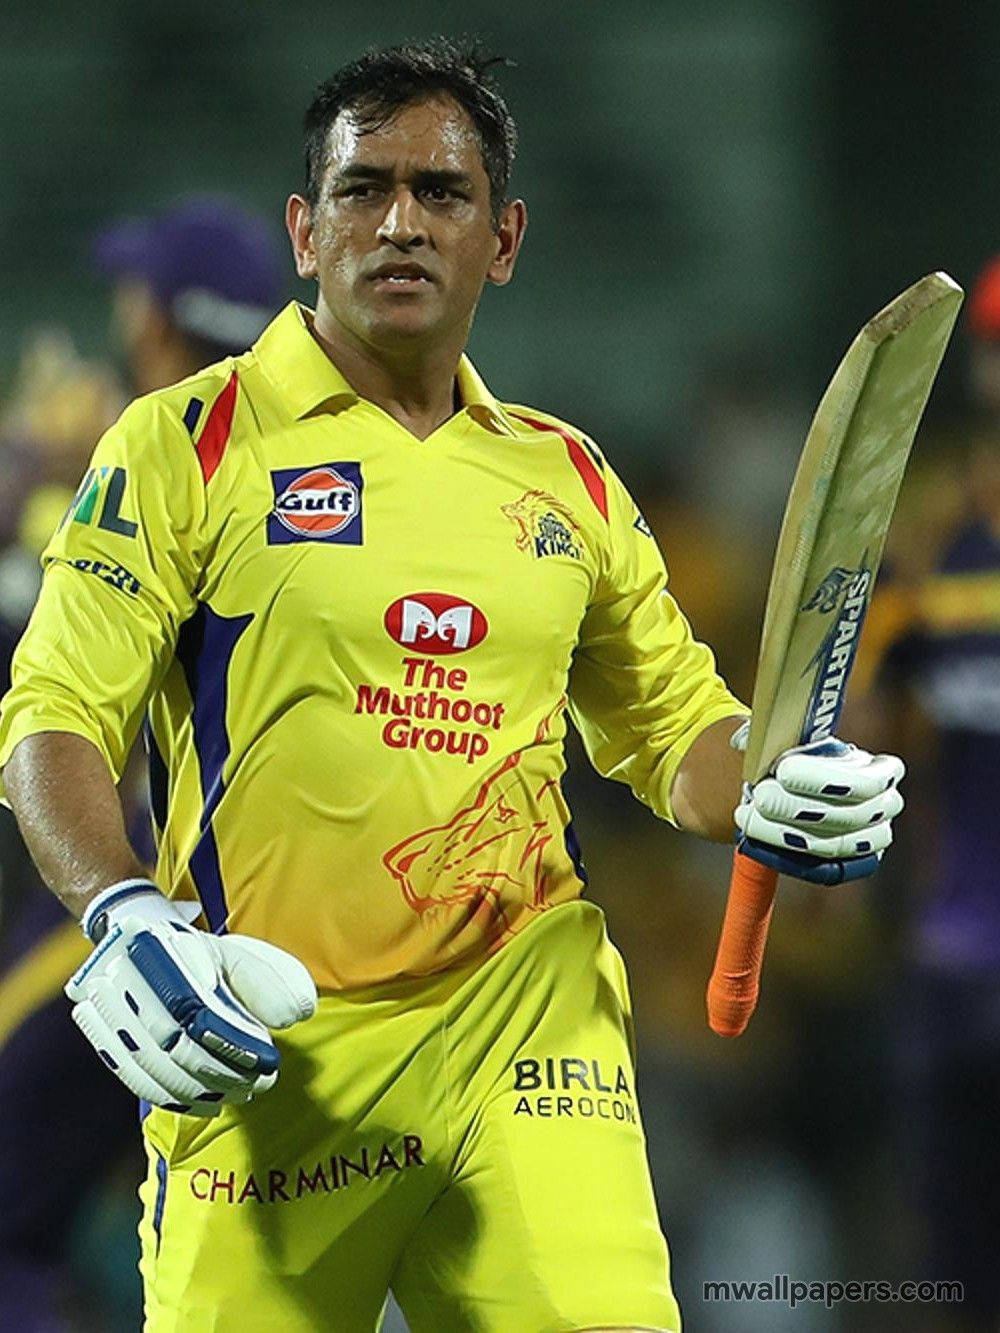 Majestic View Of Cricket Legend Ms Dhoni In Hd Background